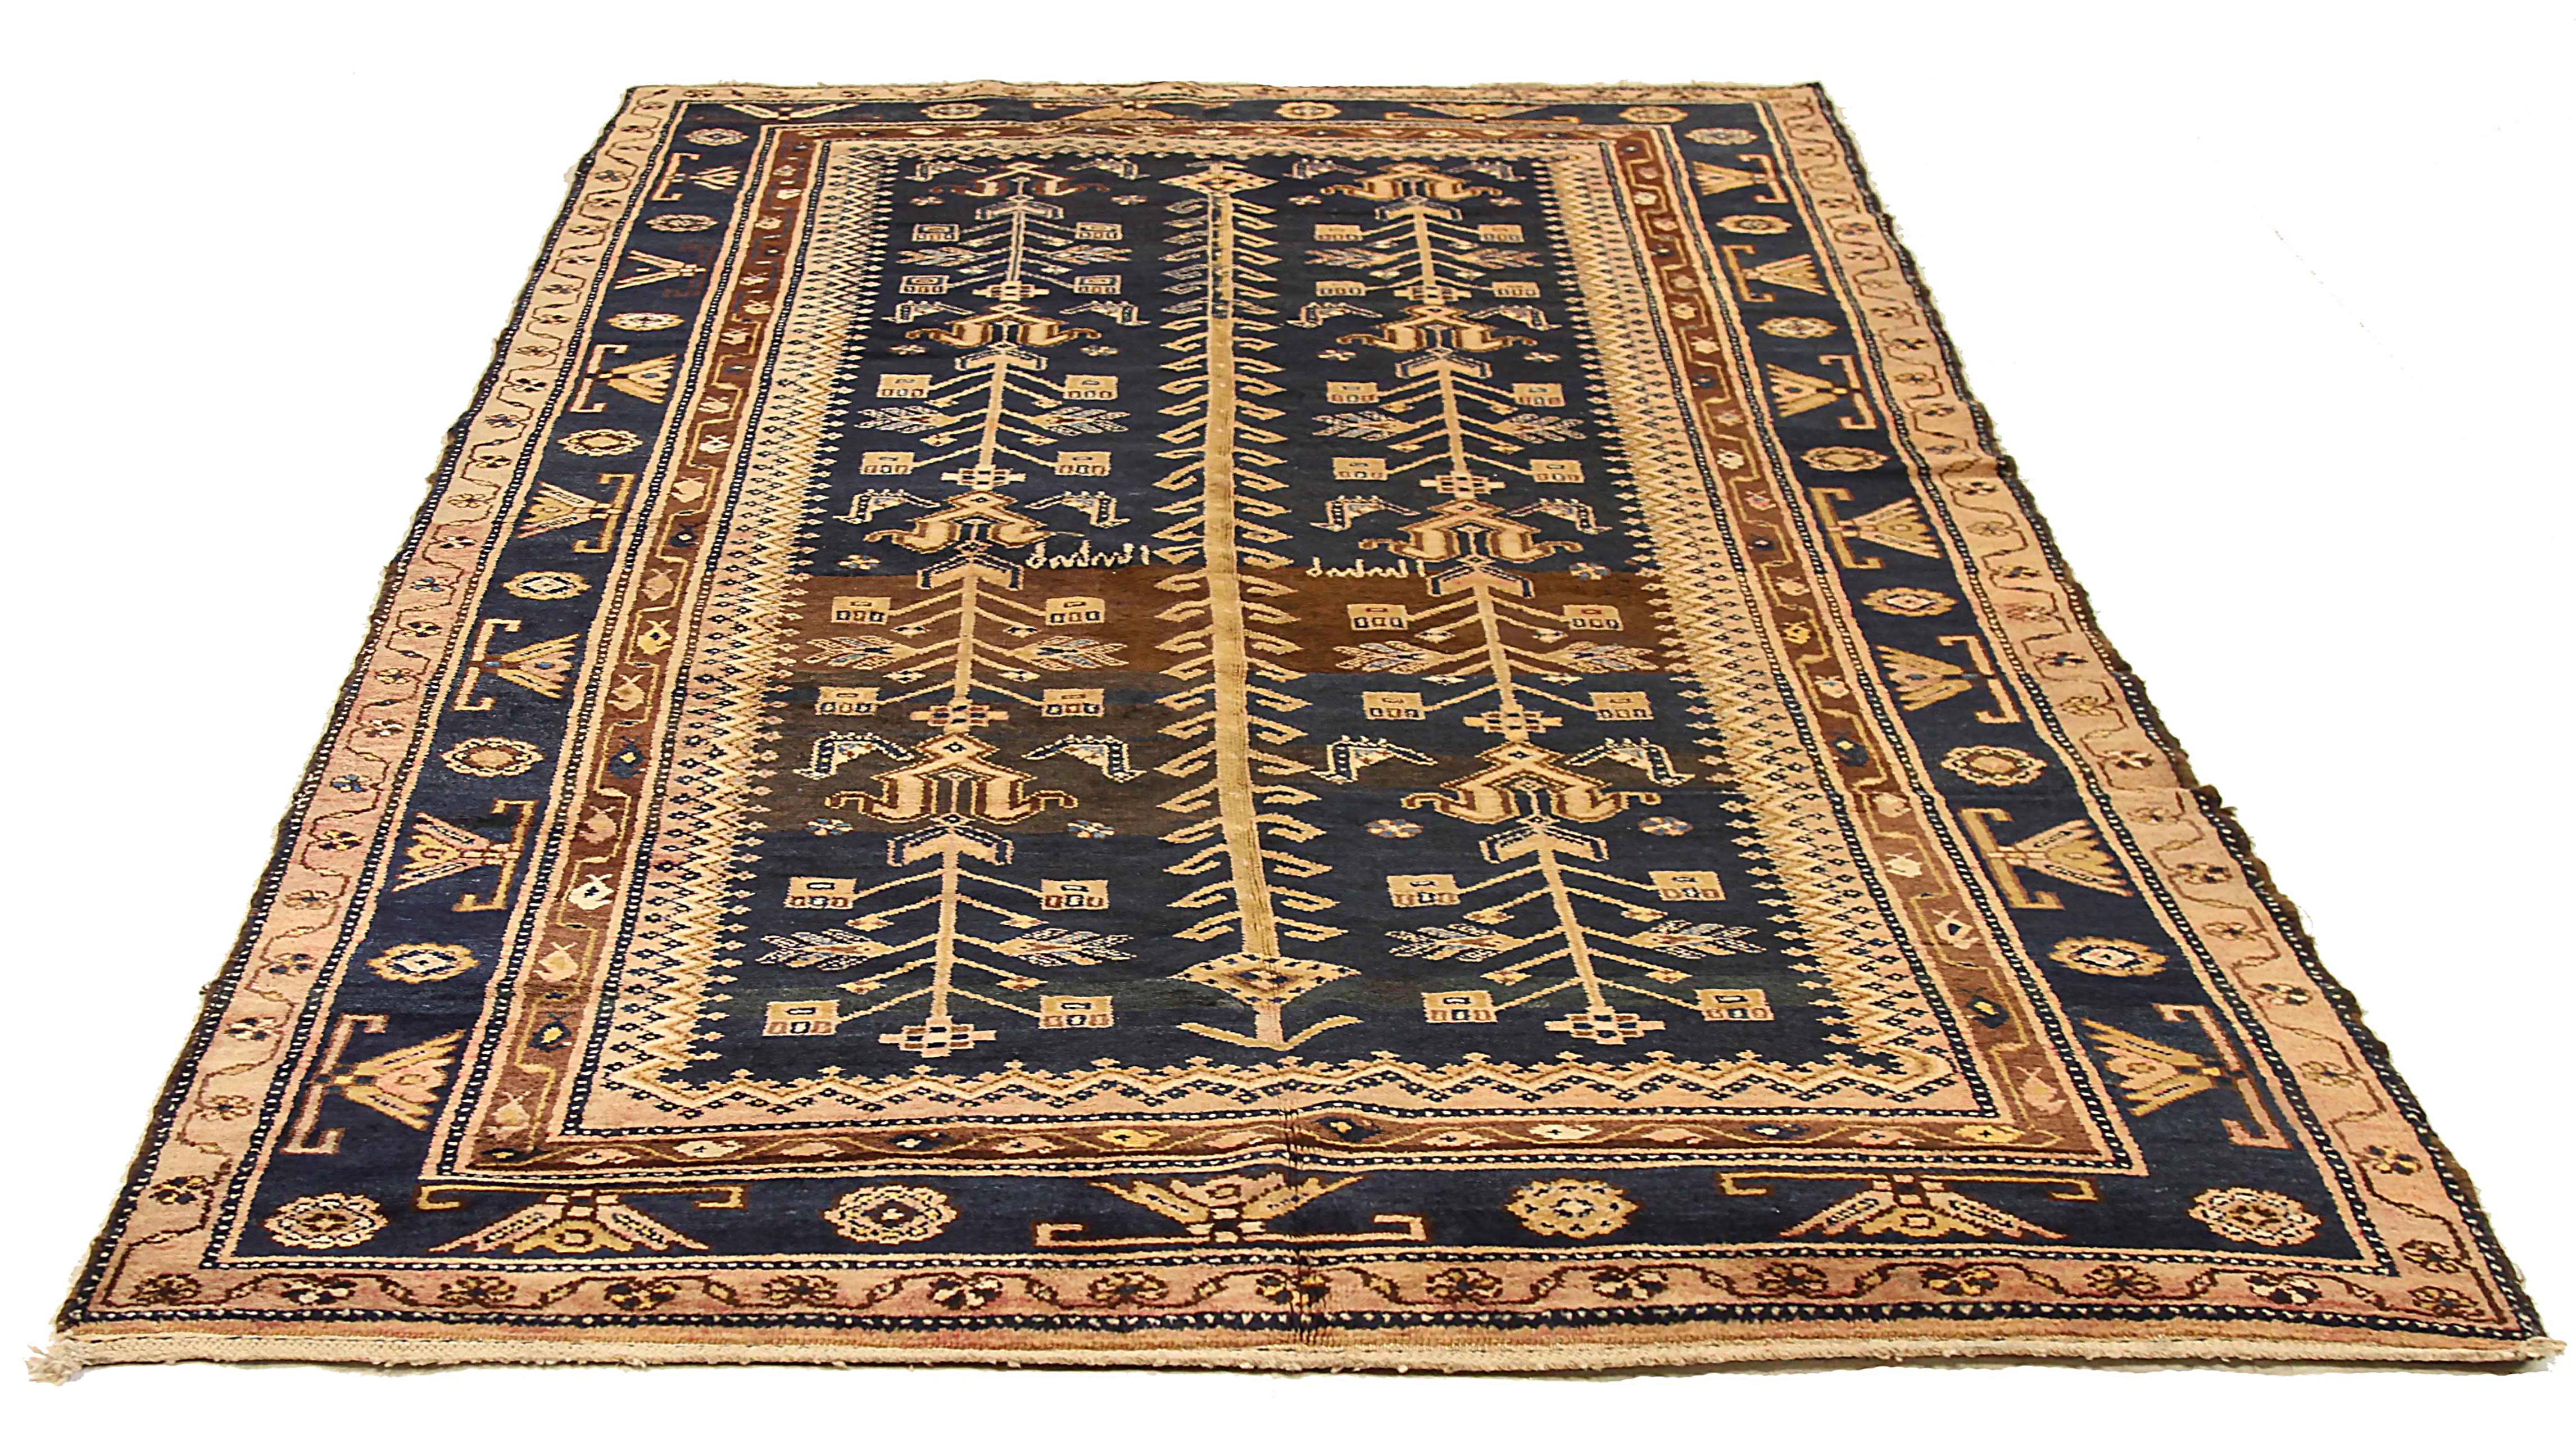 Antique Persian area rug handwoven from the finest sheep’s wool. It’s colored with all-natural vegetable dyes that are safe for humans and pets. It’s a traditional Kolyai design handwoven by expert artisans. It’s a lovely area rug that can be